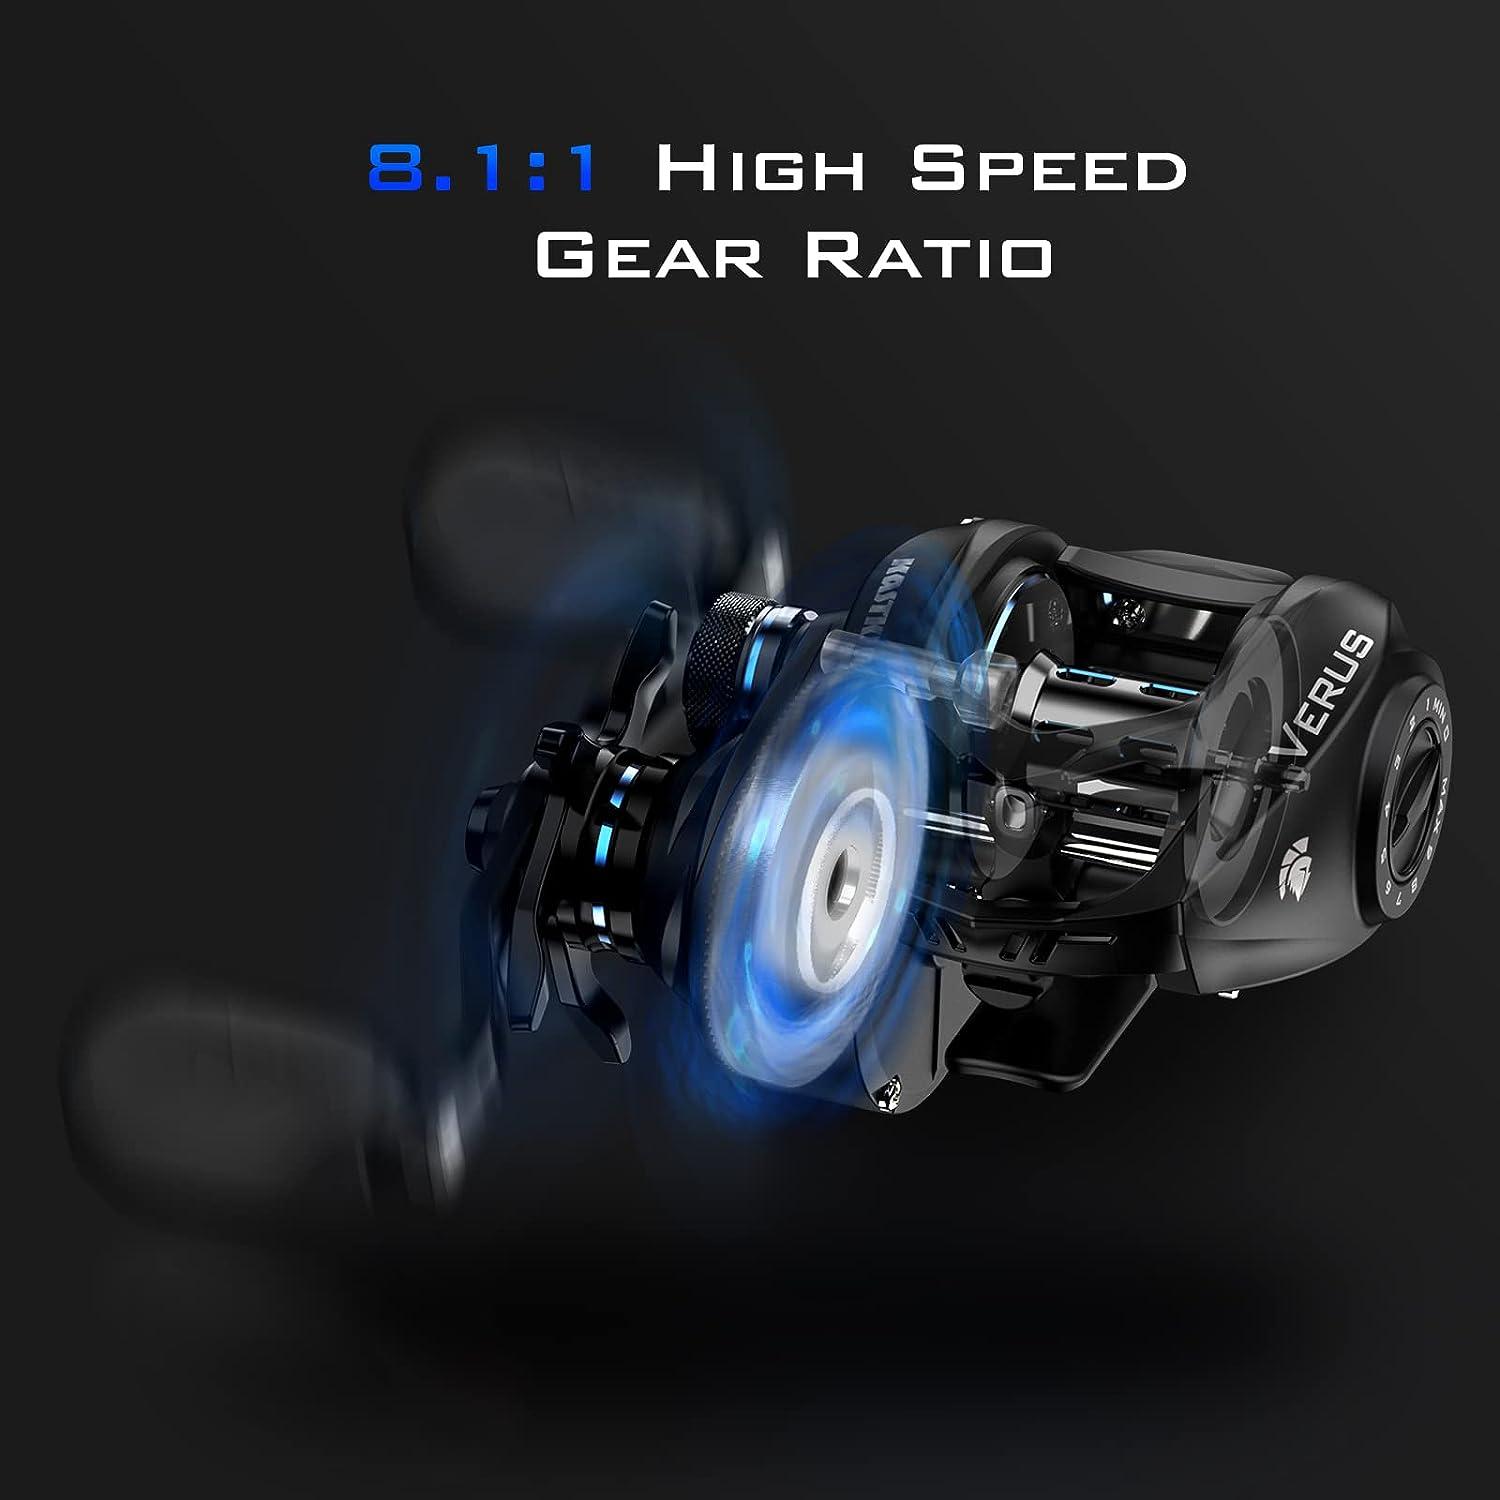 KastKing Verus Baitcasting Fishing Reel, New Assassin Version, Only 5.4 oz.  Carbon Fiber Frame & Side Covers, Carbon Fiber Drag System & 11+1 Double  Shielded Ball Bearings, 8.1:1 Gear Ratio Right Handed-8.1:1